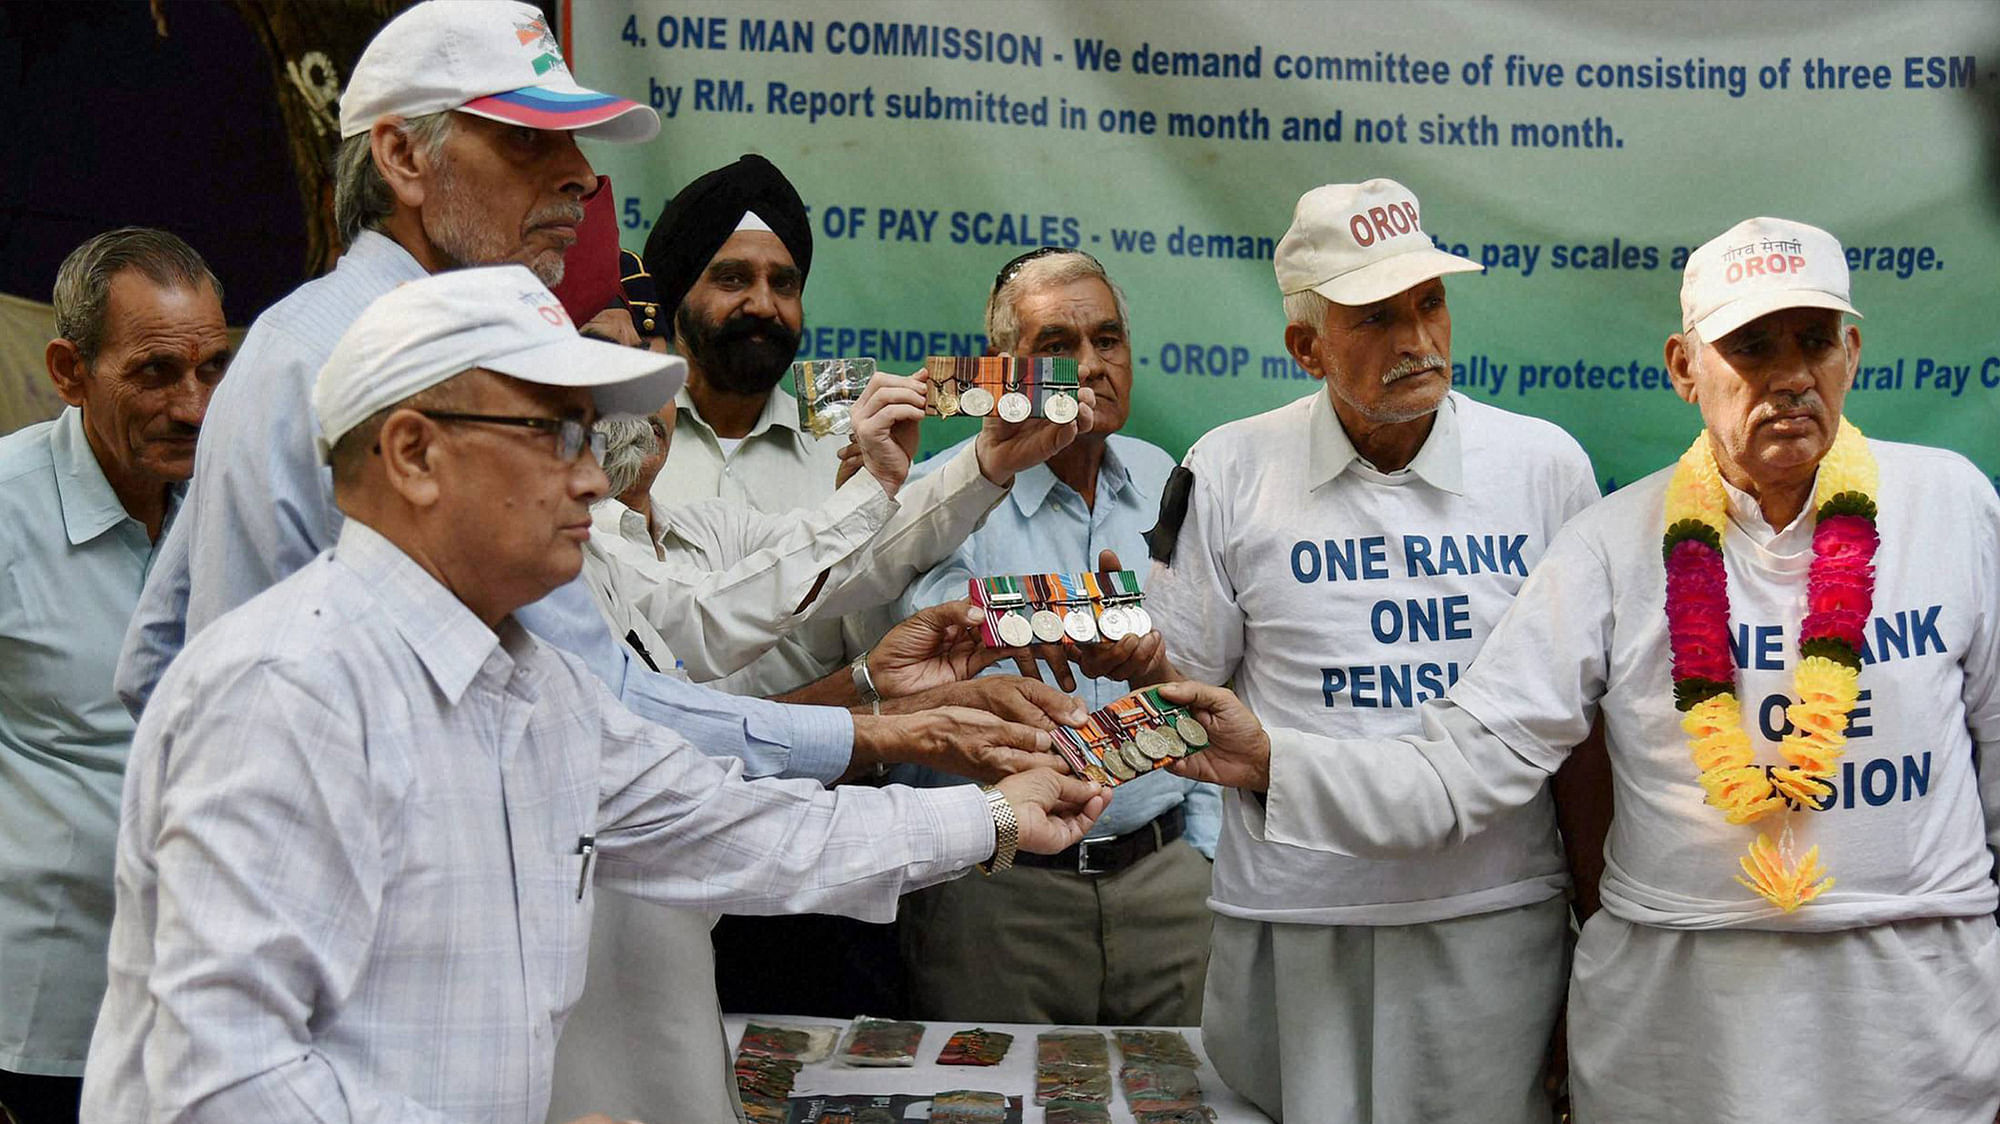 Ex-servicemen start returning their medals during their agitation for One Rank One Pension (OROP) scheme benefits and privileges at Jantar Mantar in New Delhi on Tuesday. (Photo: PTI)